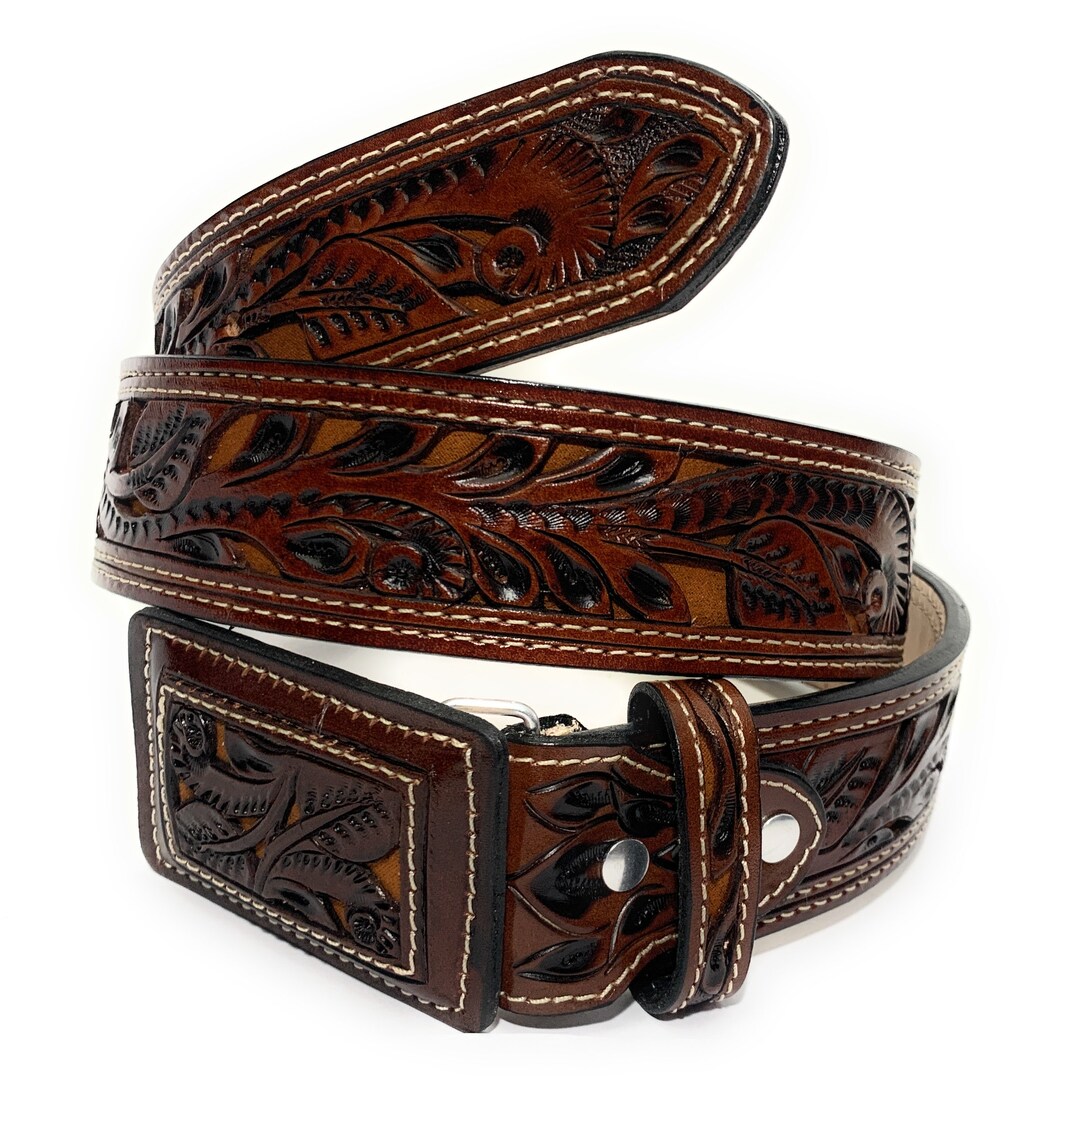 Men's Authentic Mexican Belt With Animal Embroidery/ Cinto Piteado